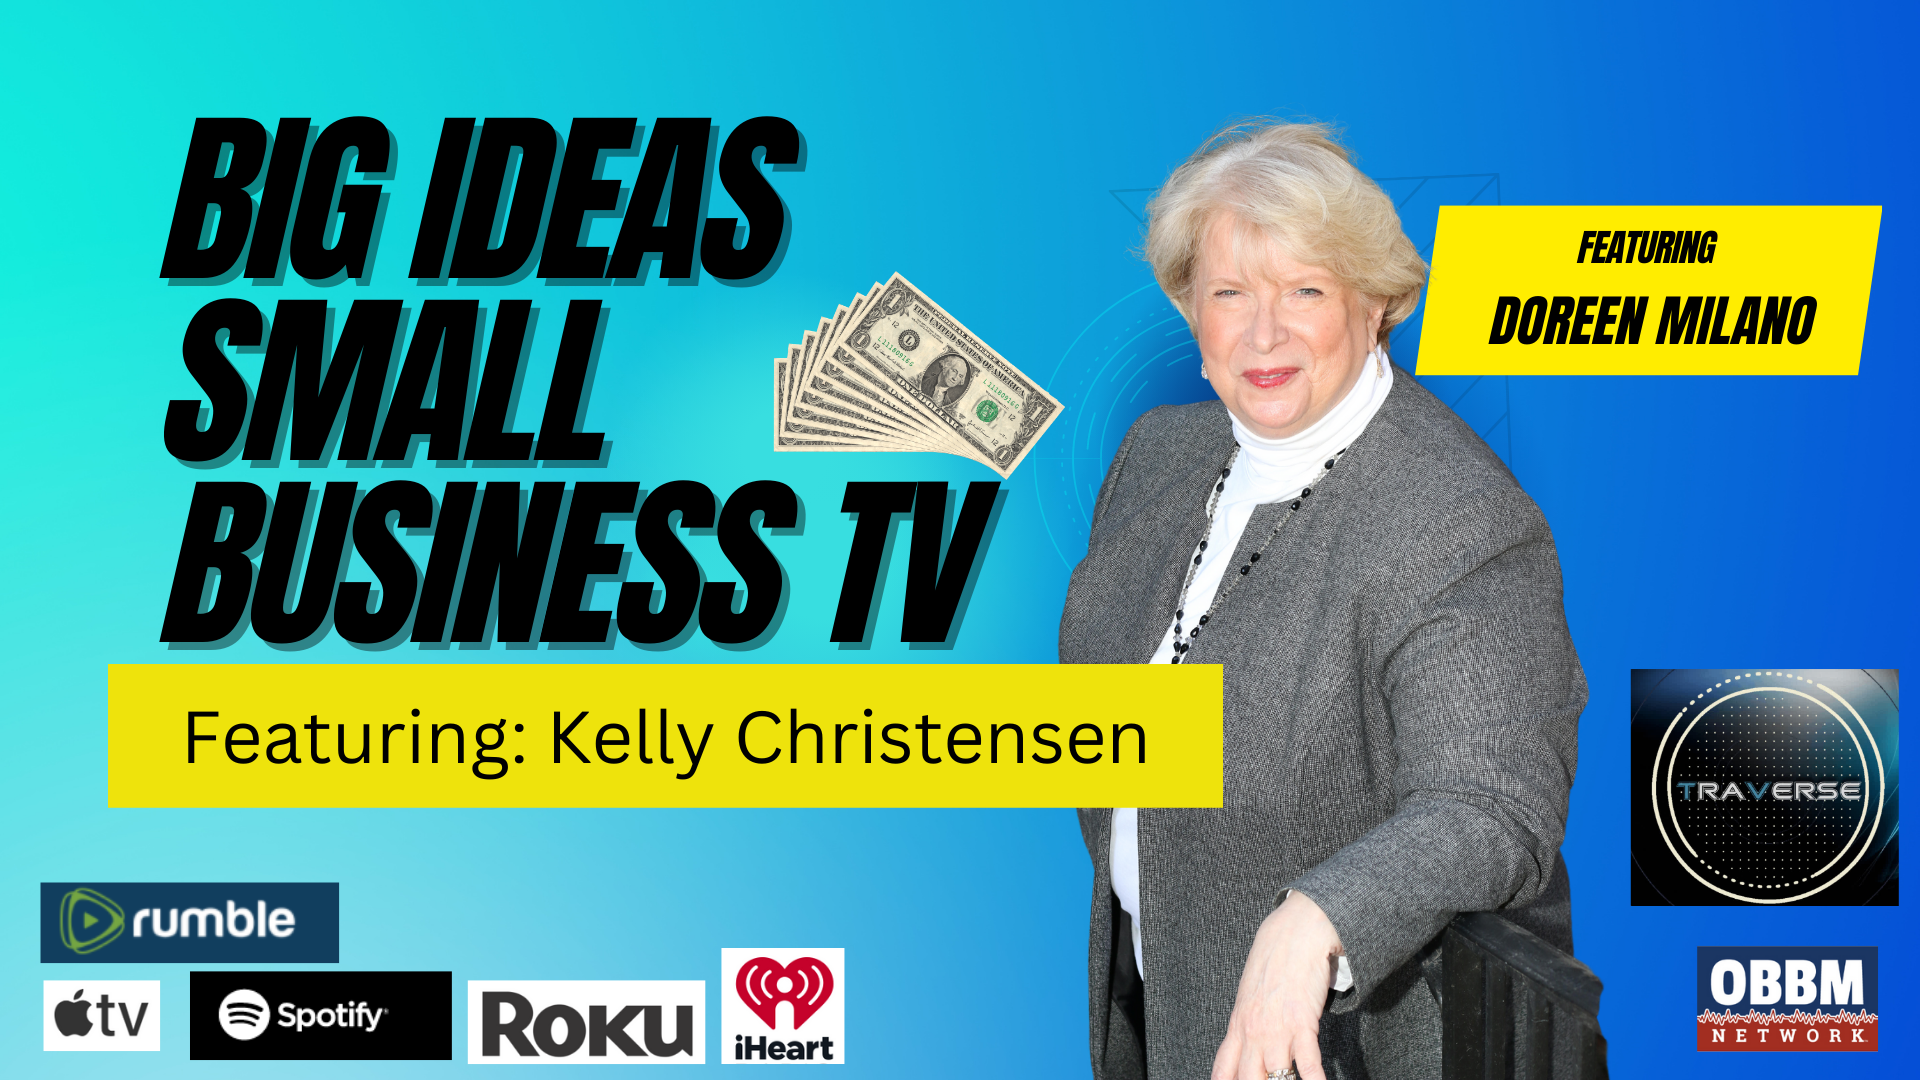 BISB22-Content is King - Big Ideas, Small Business TV with Doreen Milano